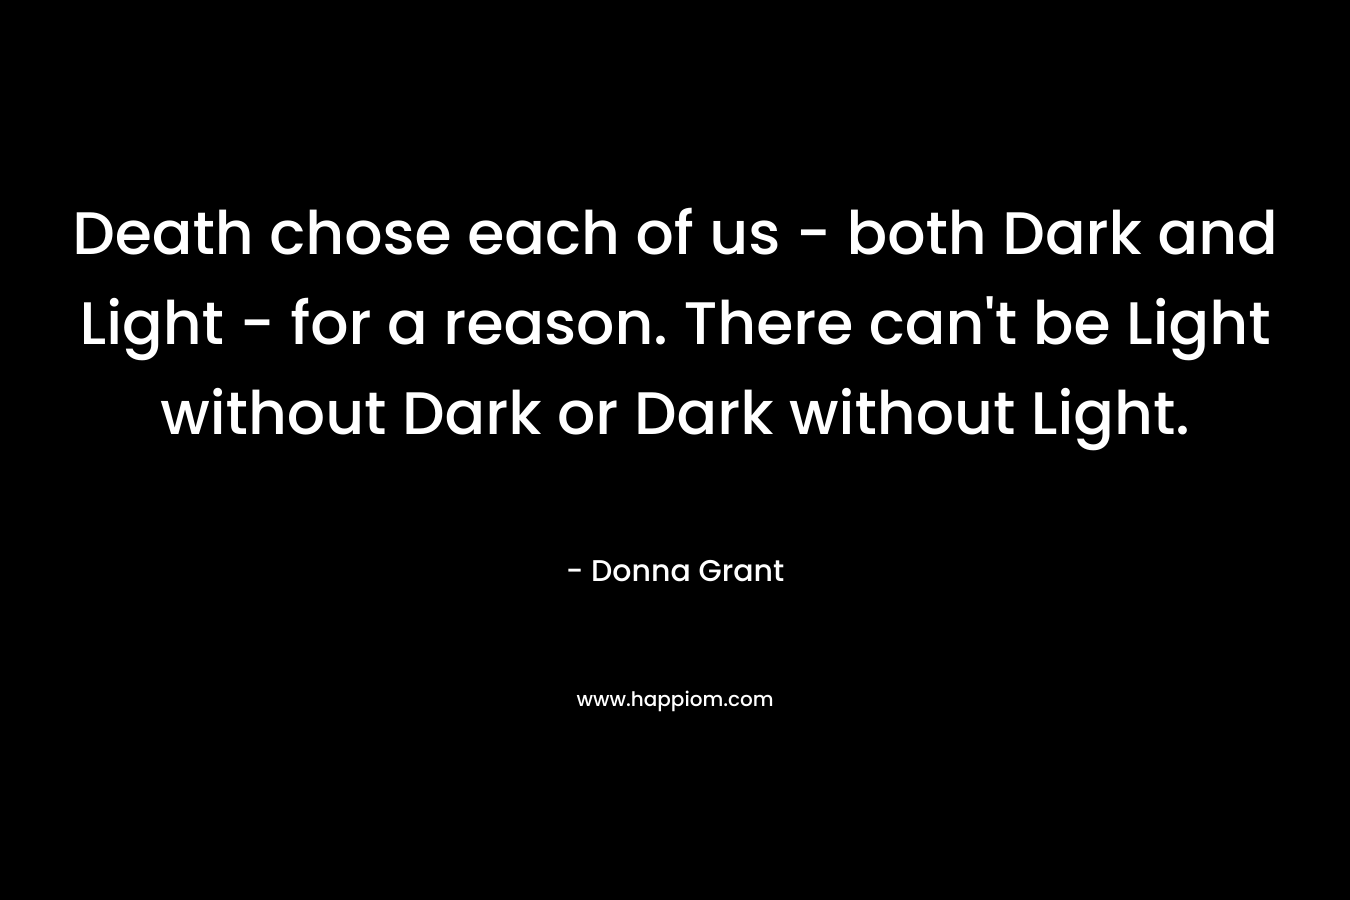 Death chose each of us - both Dark and Light - for a reason. There can't be Light without Dark or Dark without Light.